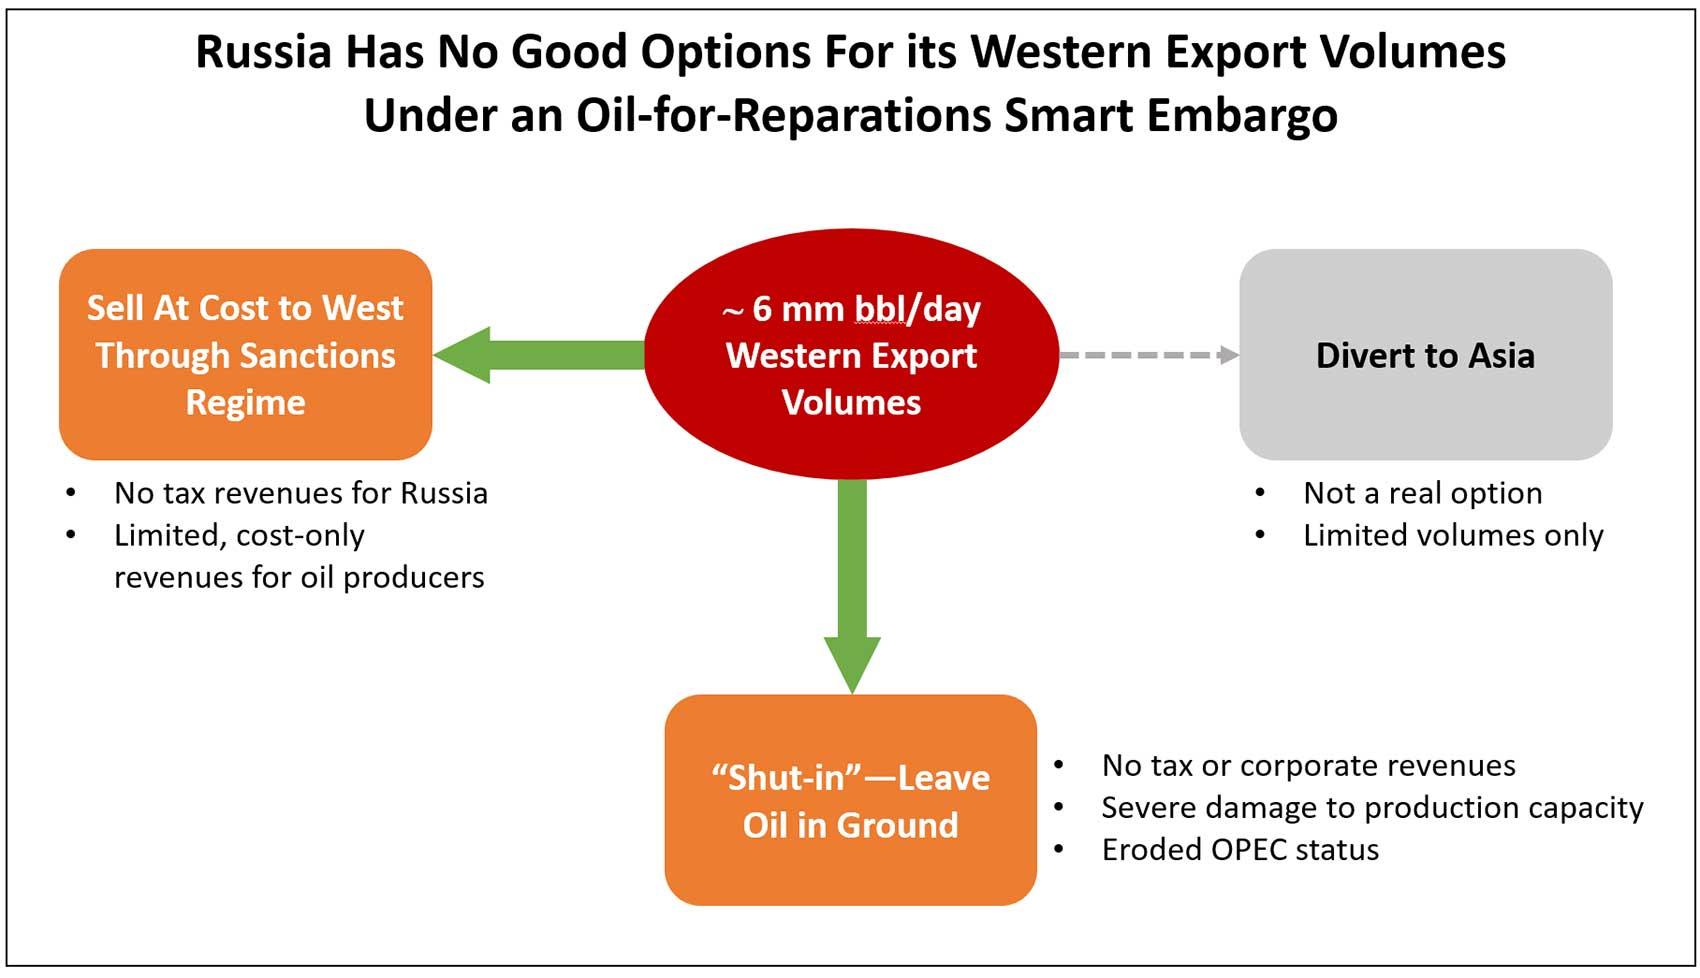 Russia has no good options for its Western export volumes under an oil-for-reparations smart embargo